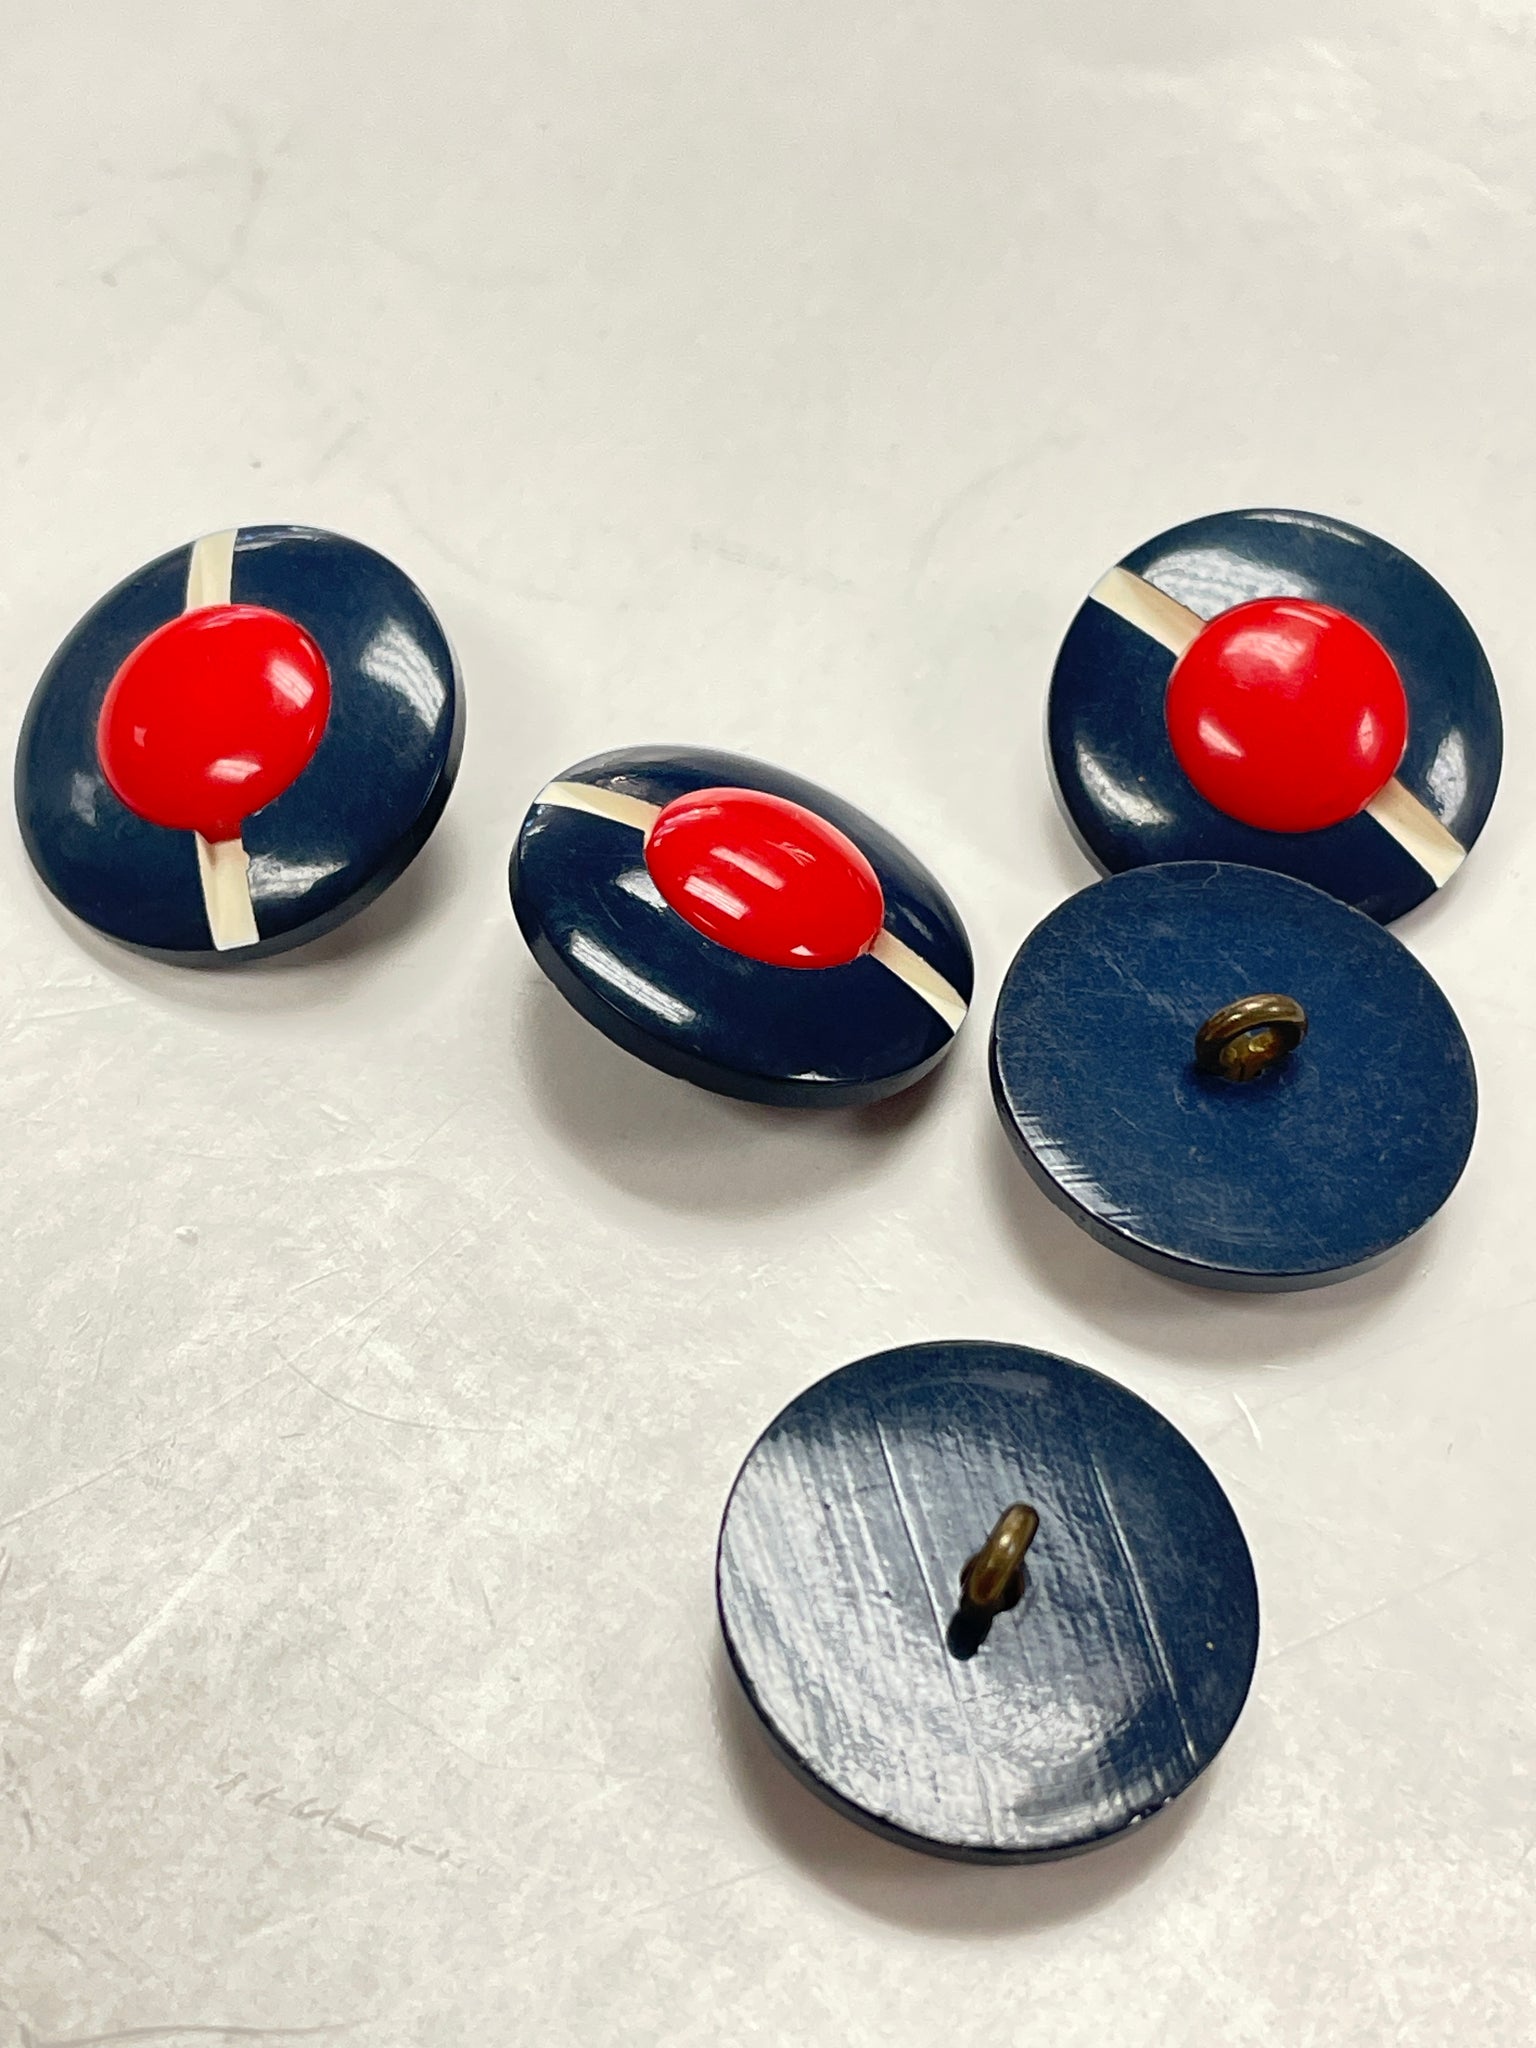 Button Set of 5 Plastic Vintage 1" - Navy Blue with Red Center